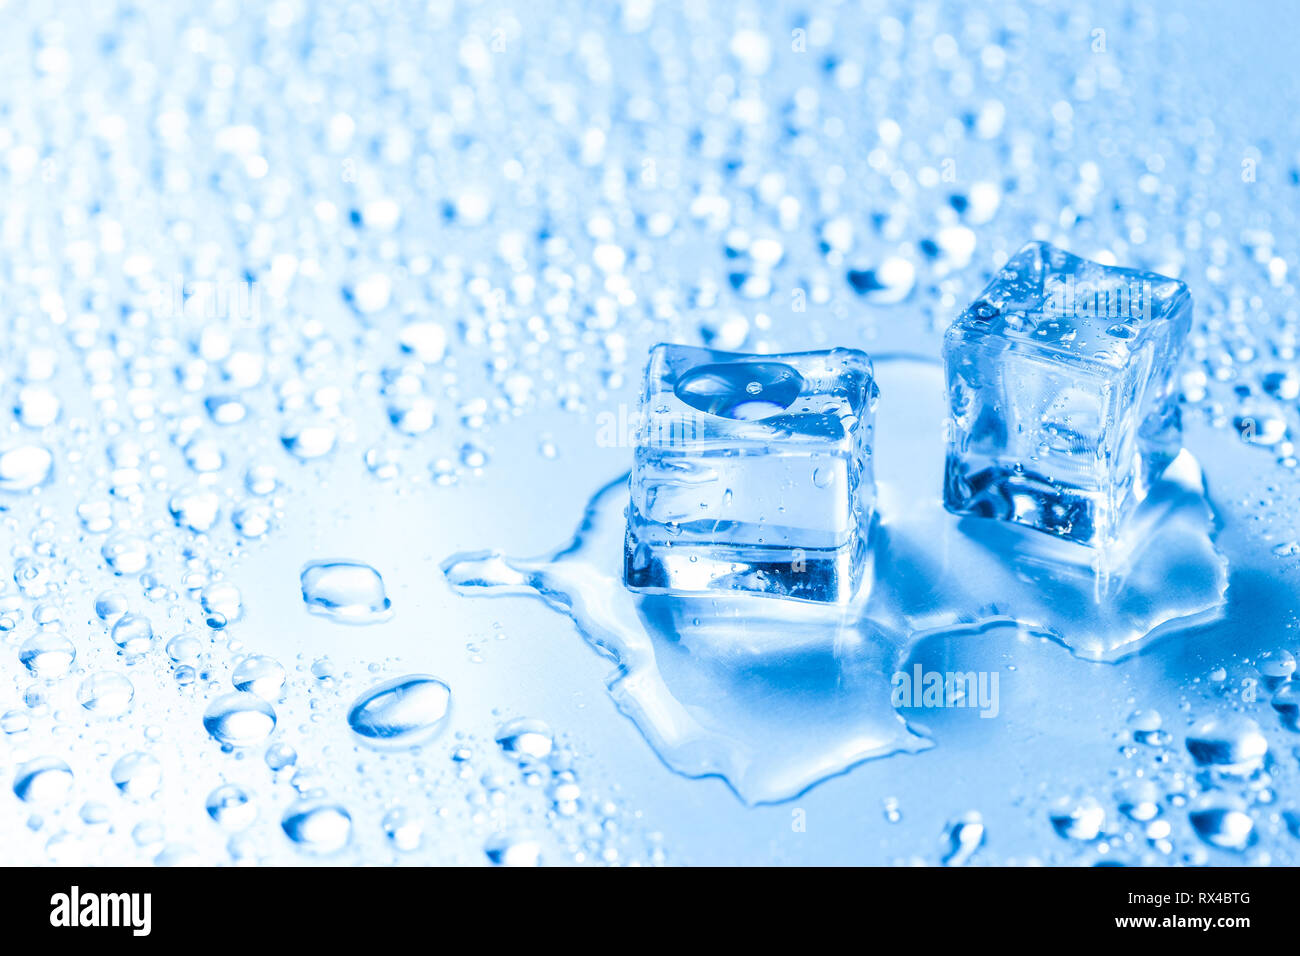 Two melted ice cubes with water drops over glass table Stock Photo